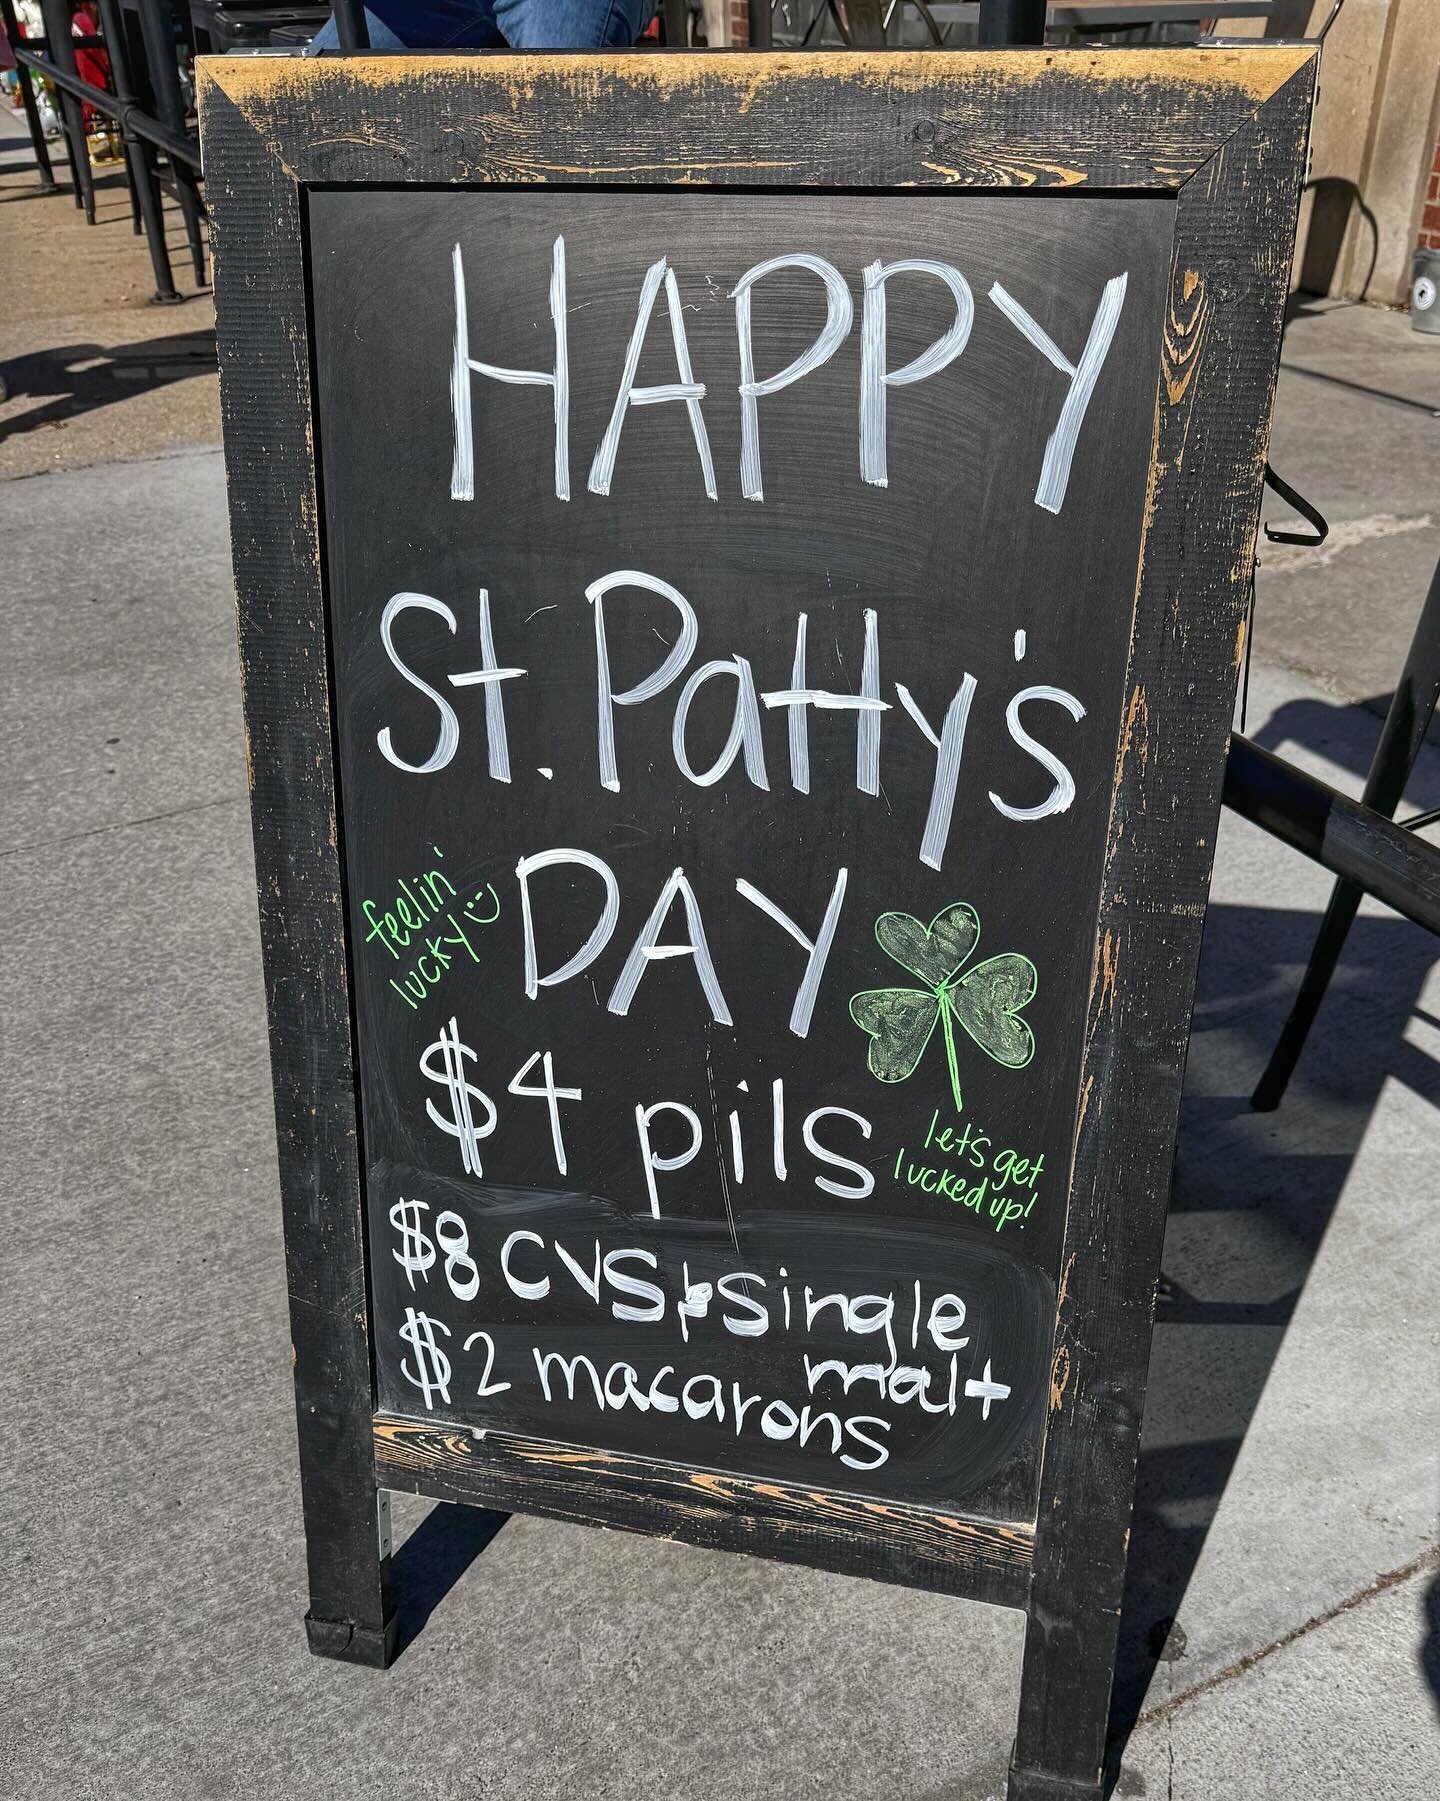 Irish eyes are smiling this weekend! Stop in for some shamrockin&rsquo; specials like a pint of Coffee Vanilla Stout and a shot of American Single Malt for $8, a pint of green Pils for $4, and $2 macarons from @sugaredledge (strawberry, mint chip, an